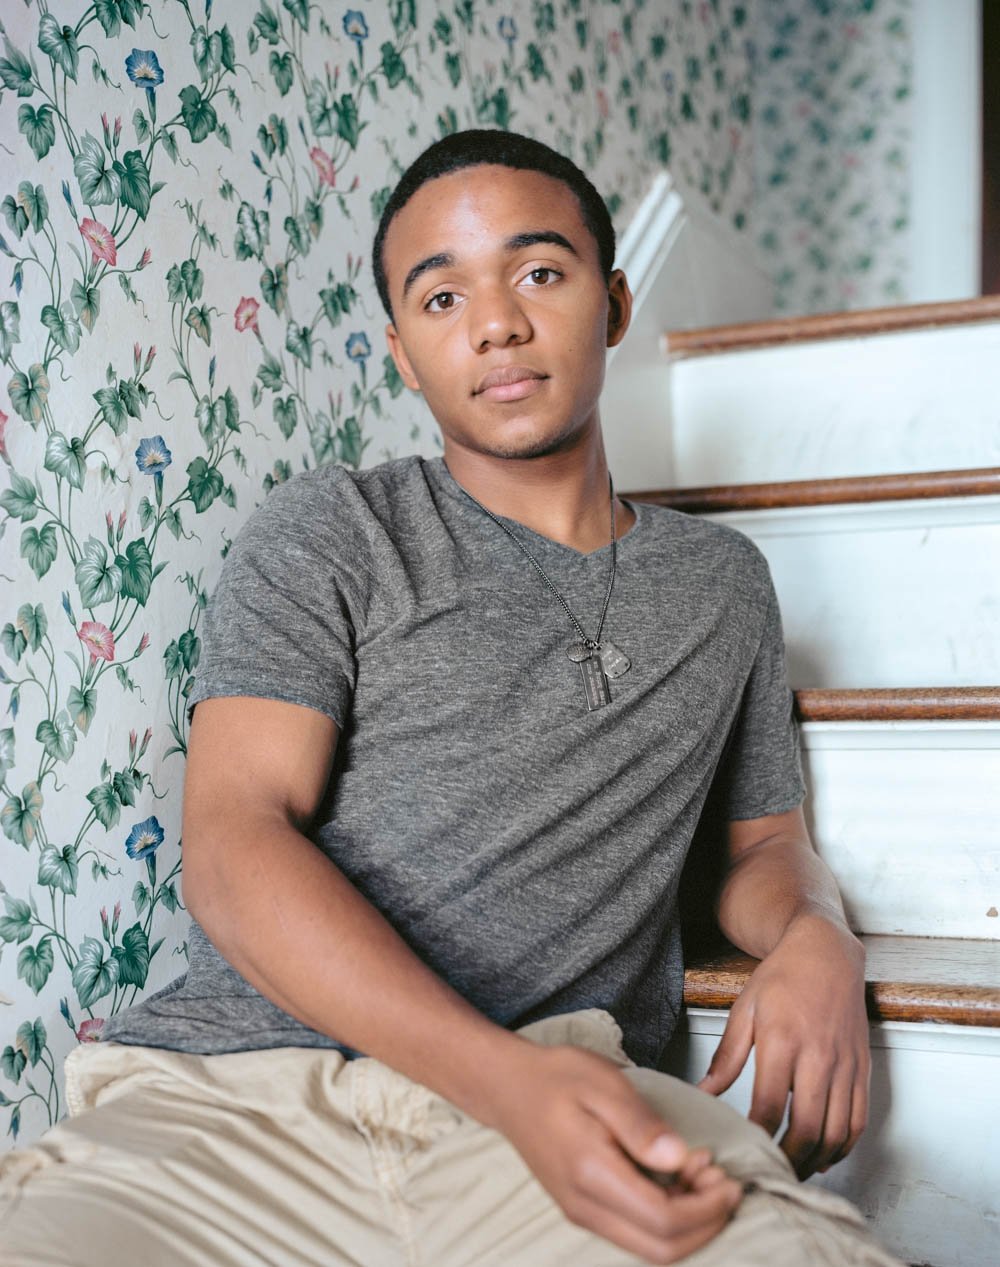 Kevin, a boy seated on stairs in home.